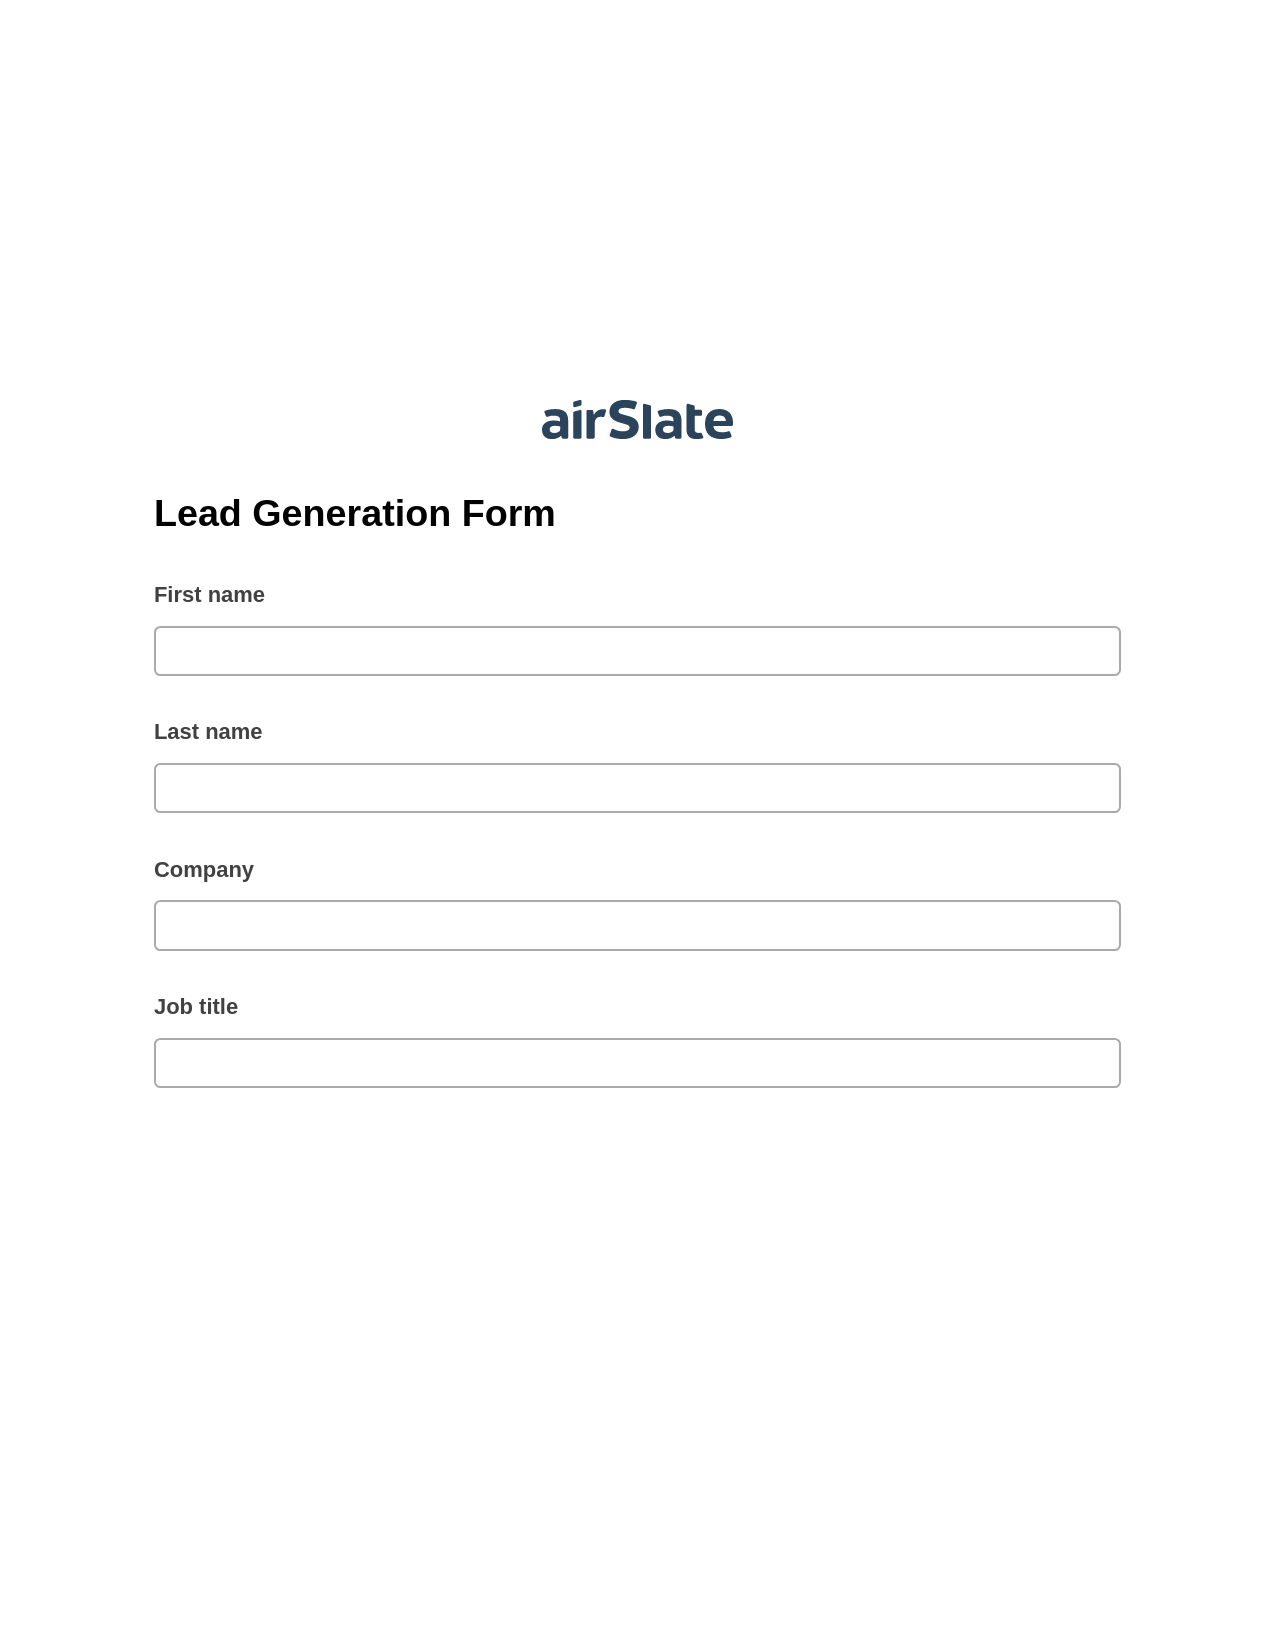 Lead Generation Form Pre-fill from AirTable Bot, Send a Slate to Salesforce Contact Bot, Archive to Dropbox Bot